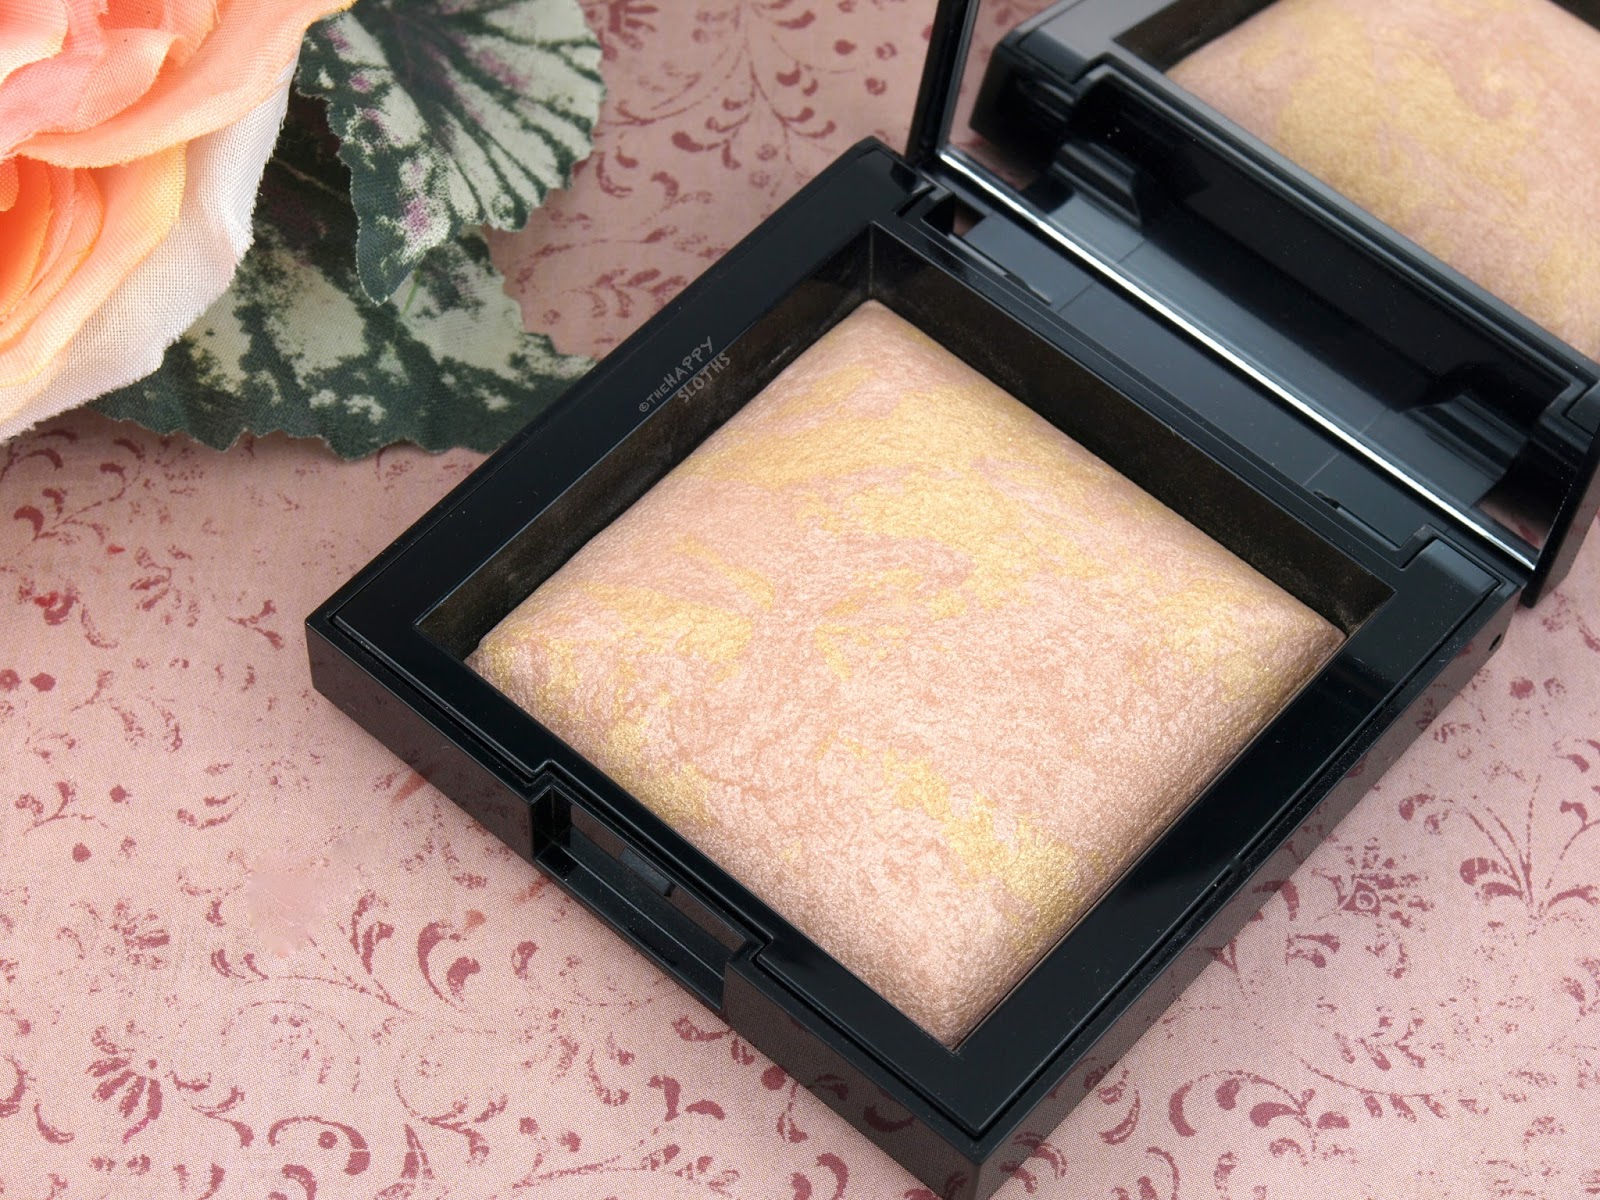 bareMinerals Invisible Glow Powder Highlighter in "Medium": Review and Swatches